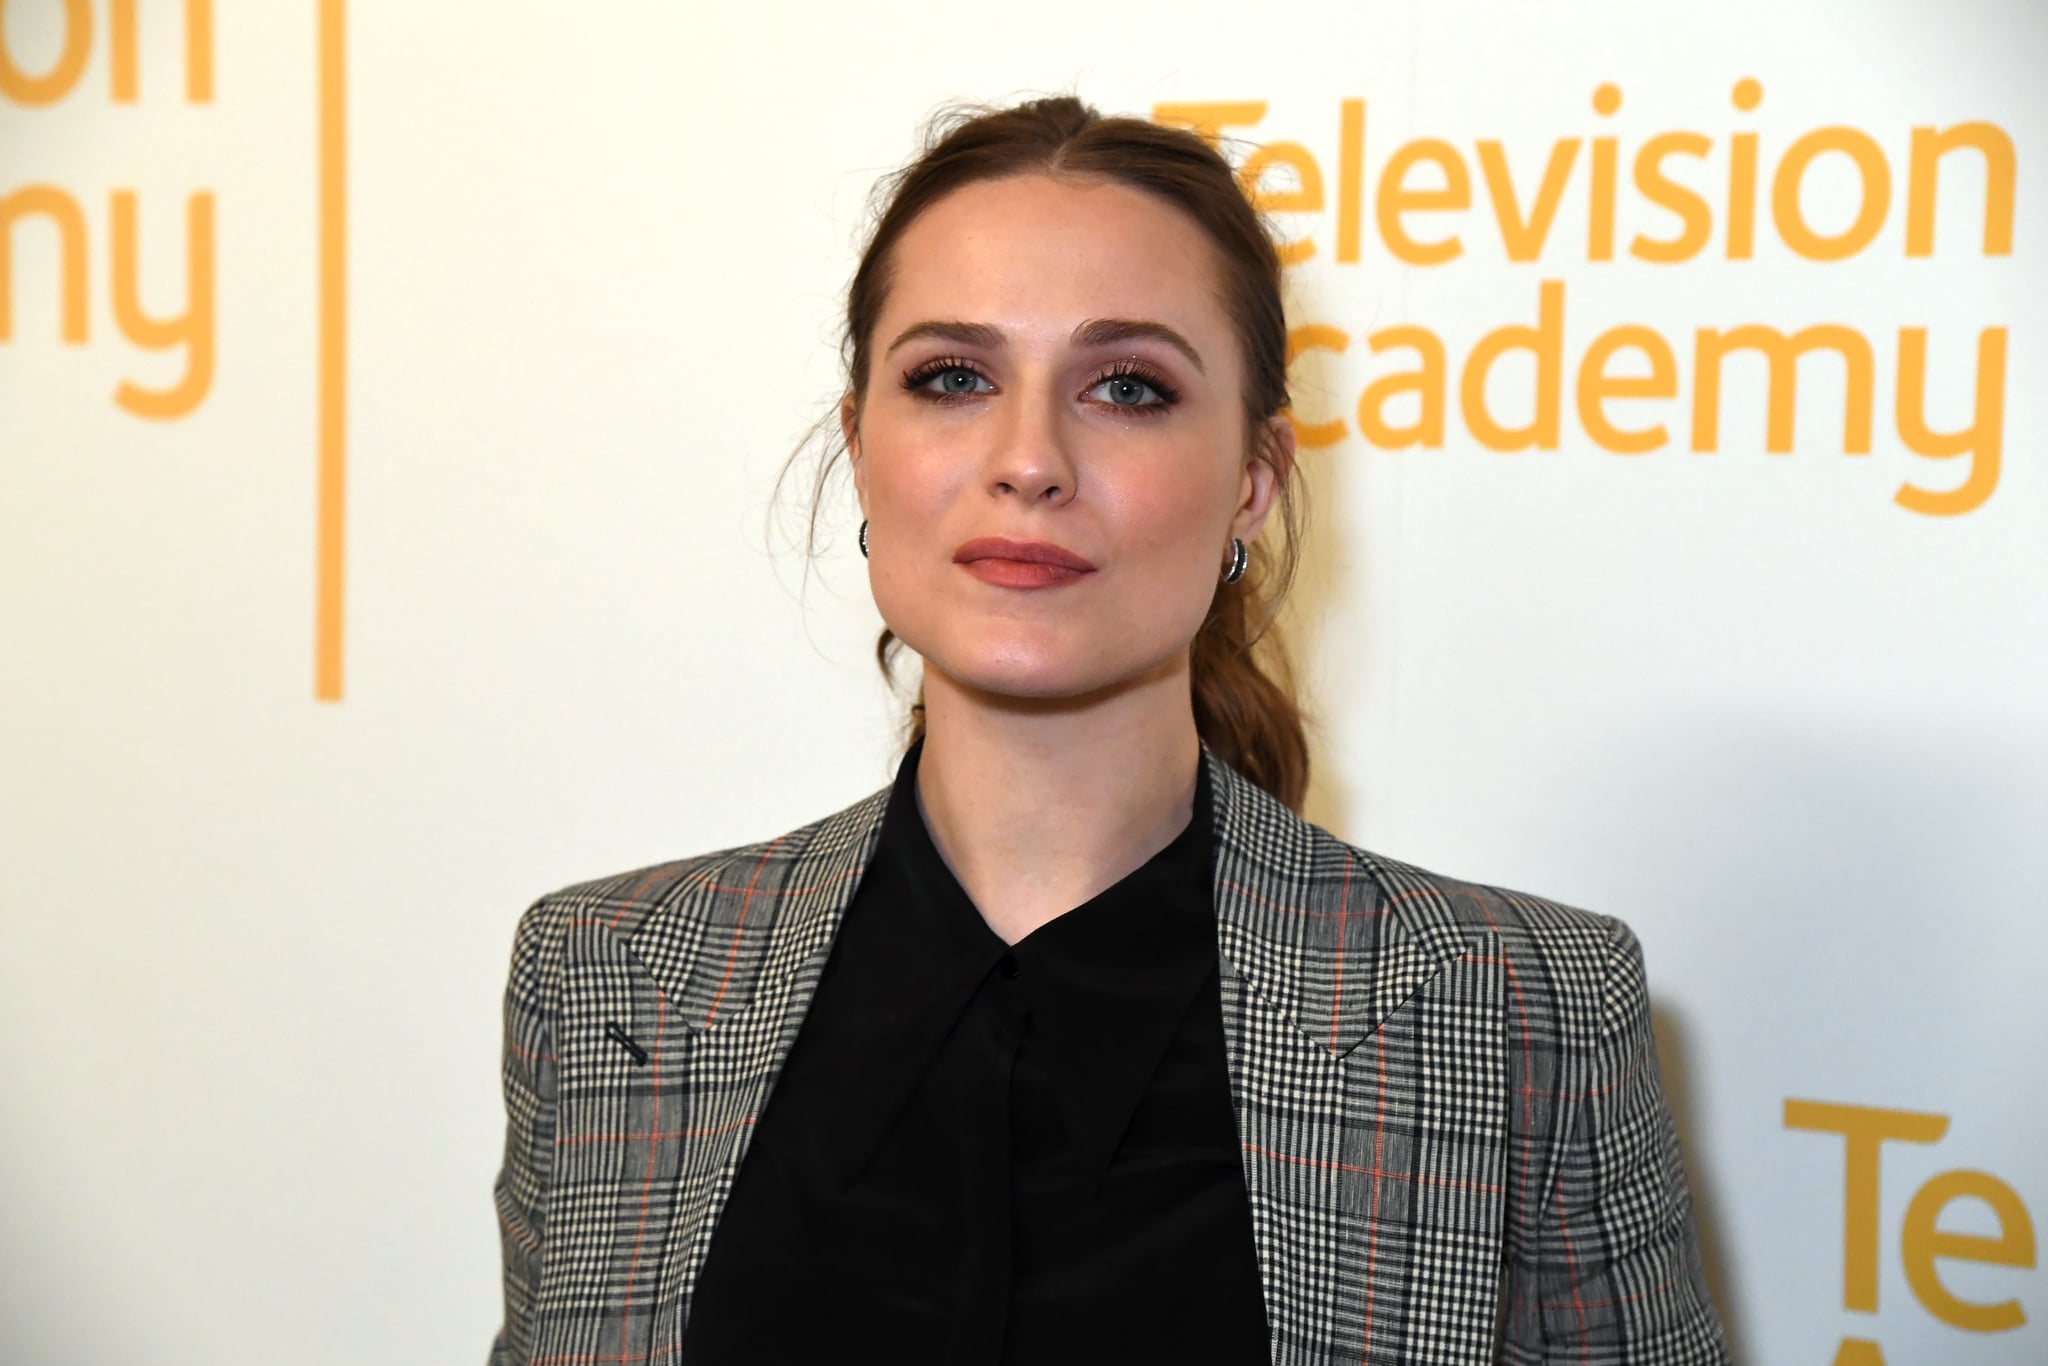 NORTH HOLLYWOOD, CALIFORNIA - MARCH 06: Evan Rachel Wood attends the screening & panel discussion of the HBO drama series